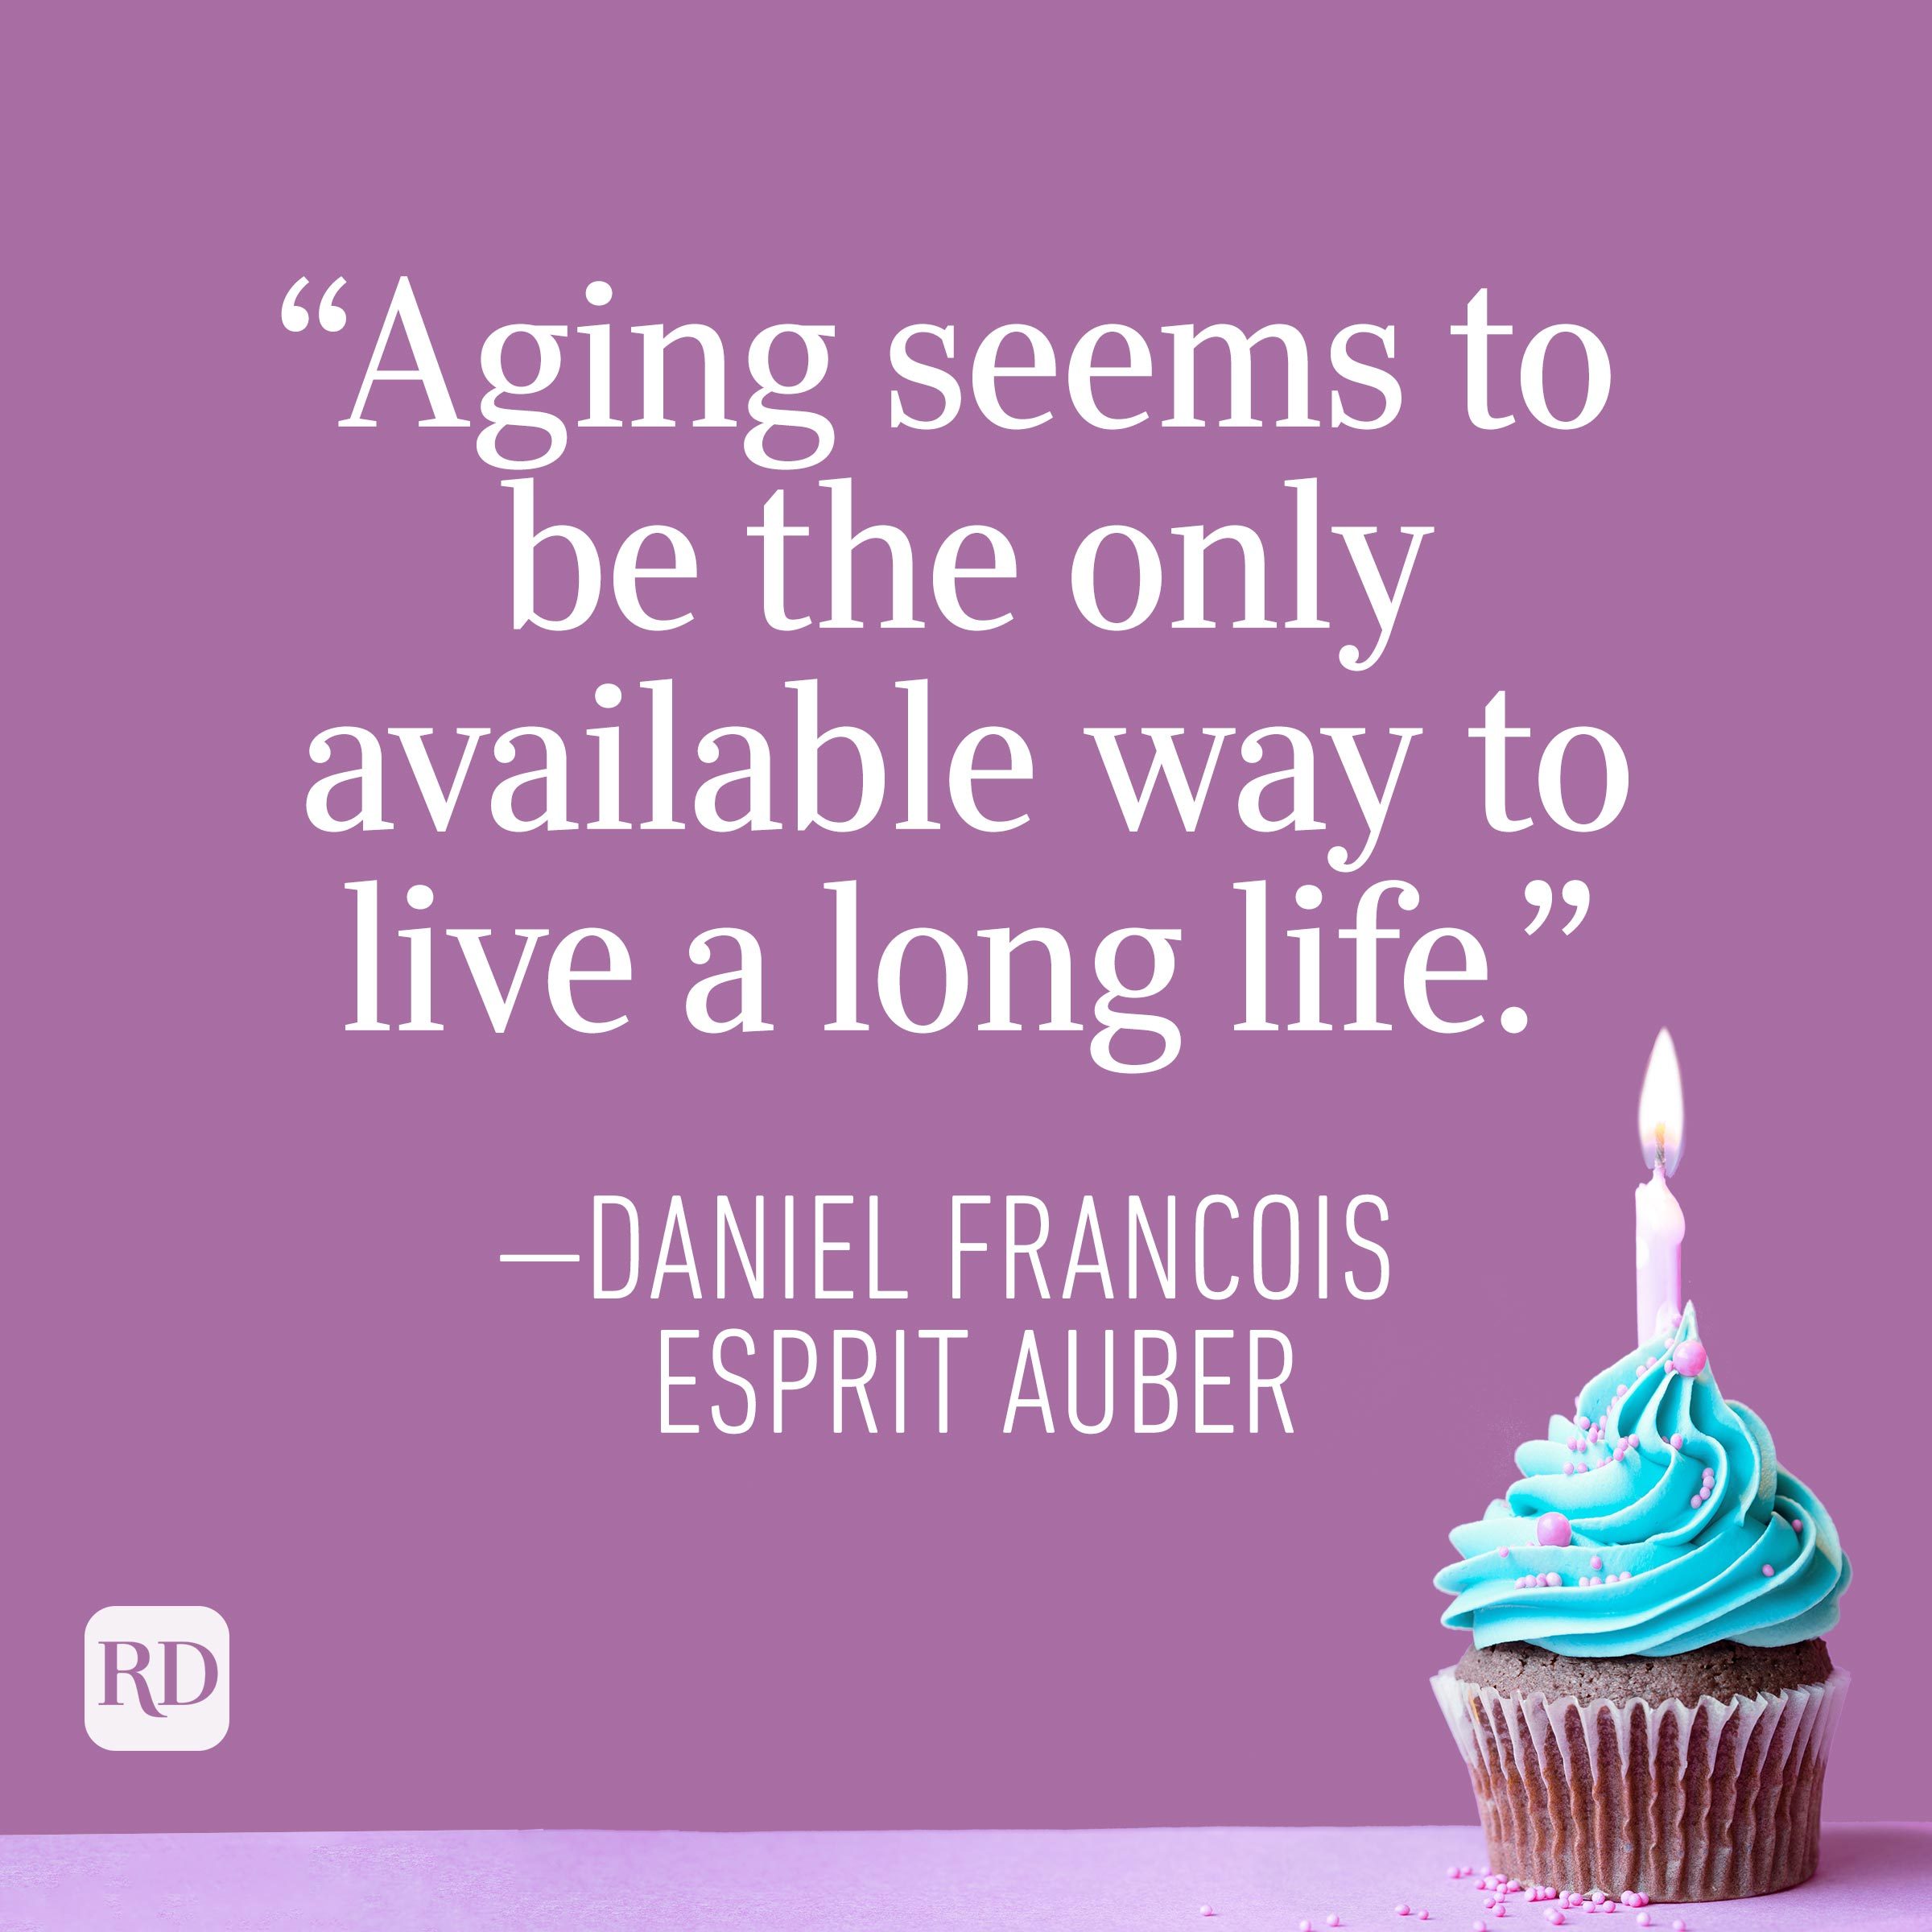 "Aging seems to be the only available way to live a long life." —Daniel Francois Esprit Auber